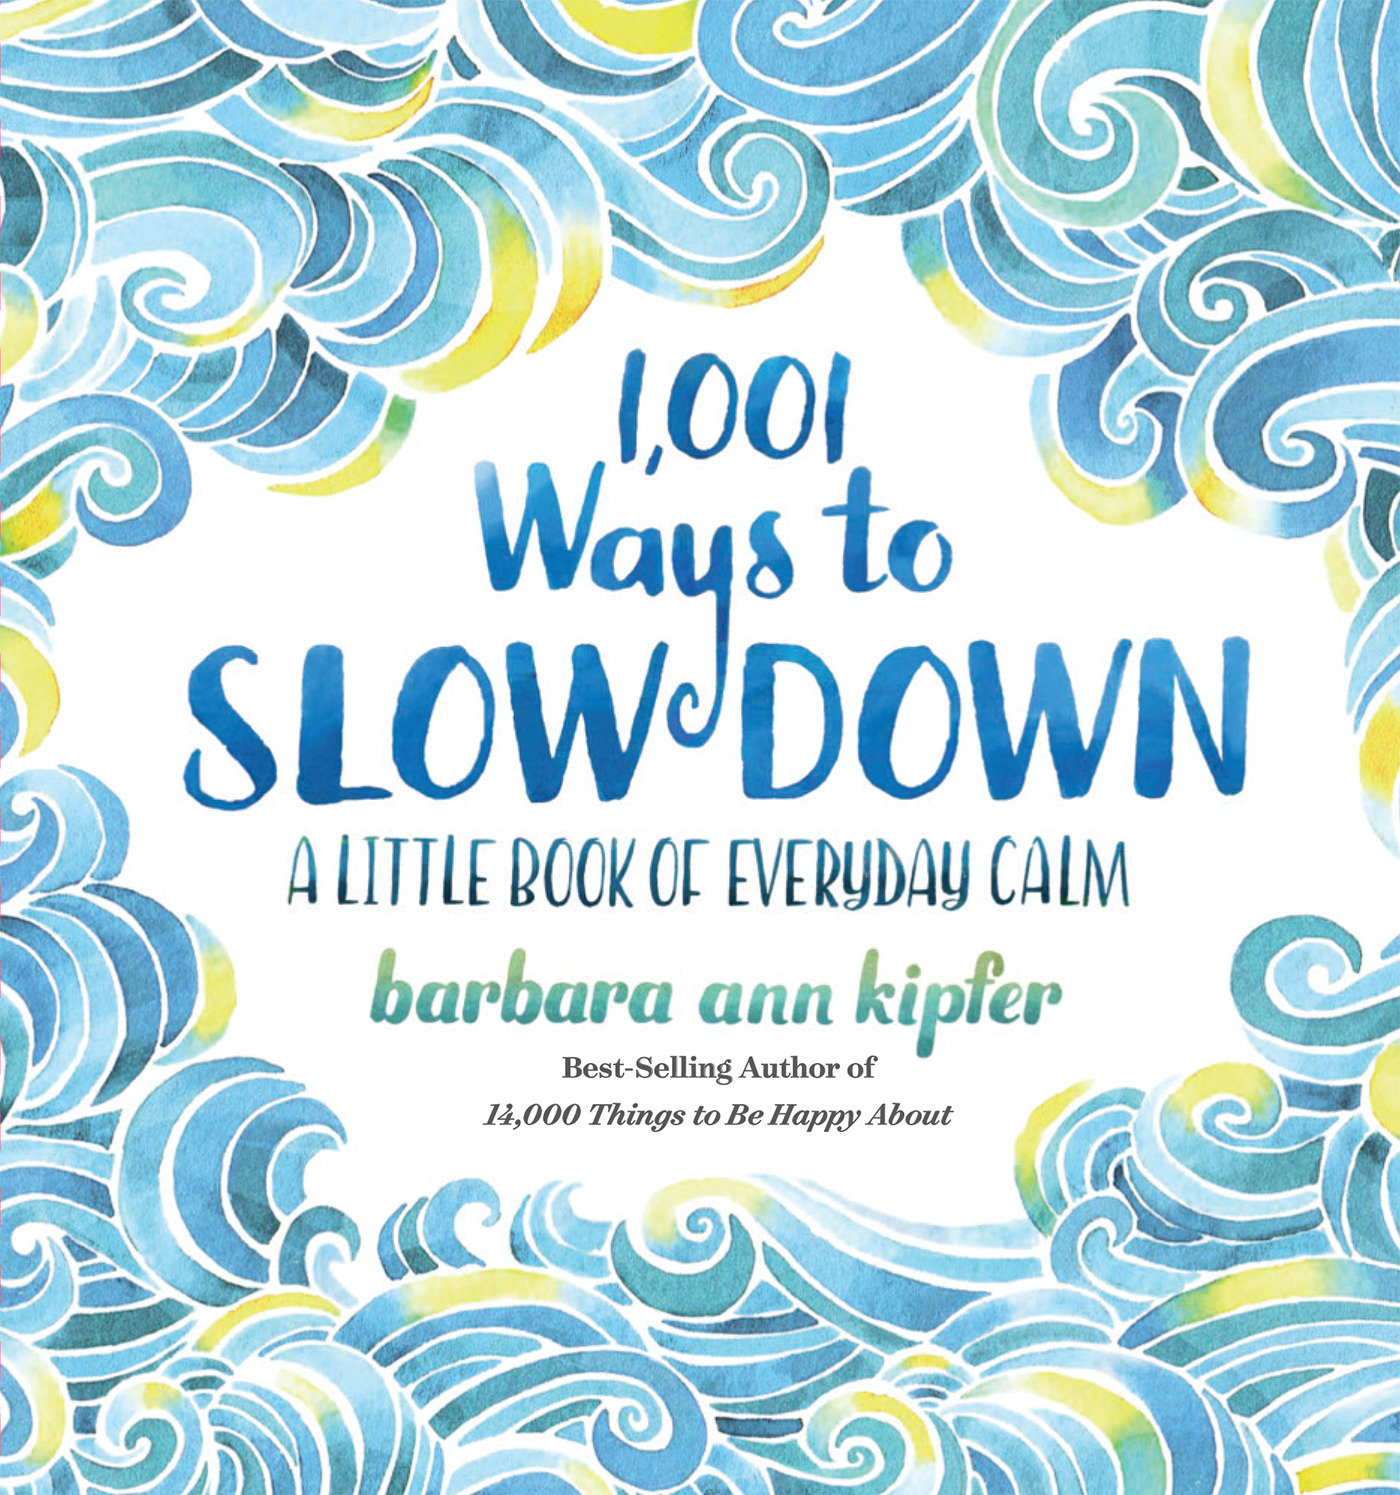 1,001 Ways To Slow Down (Hardcover Book)